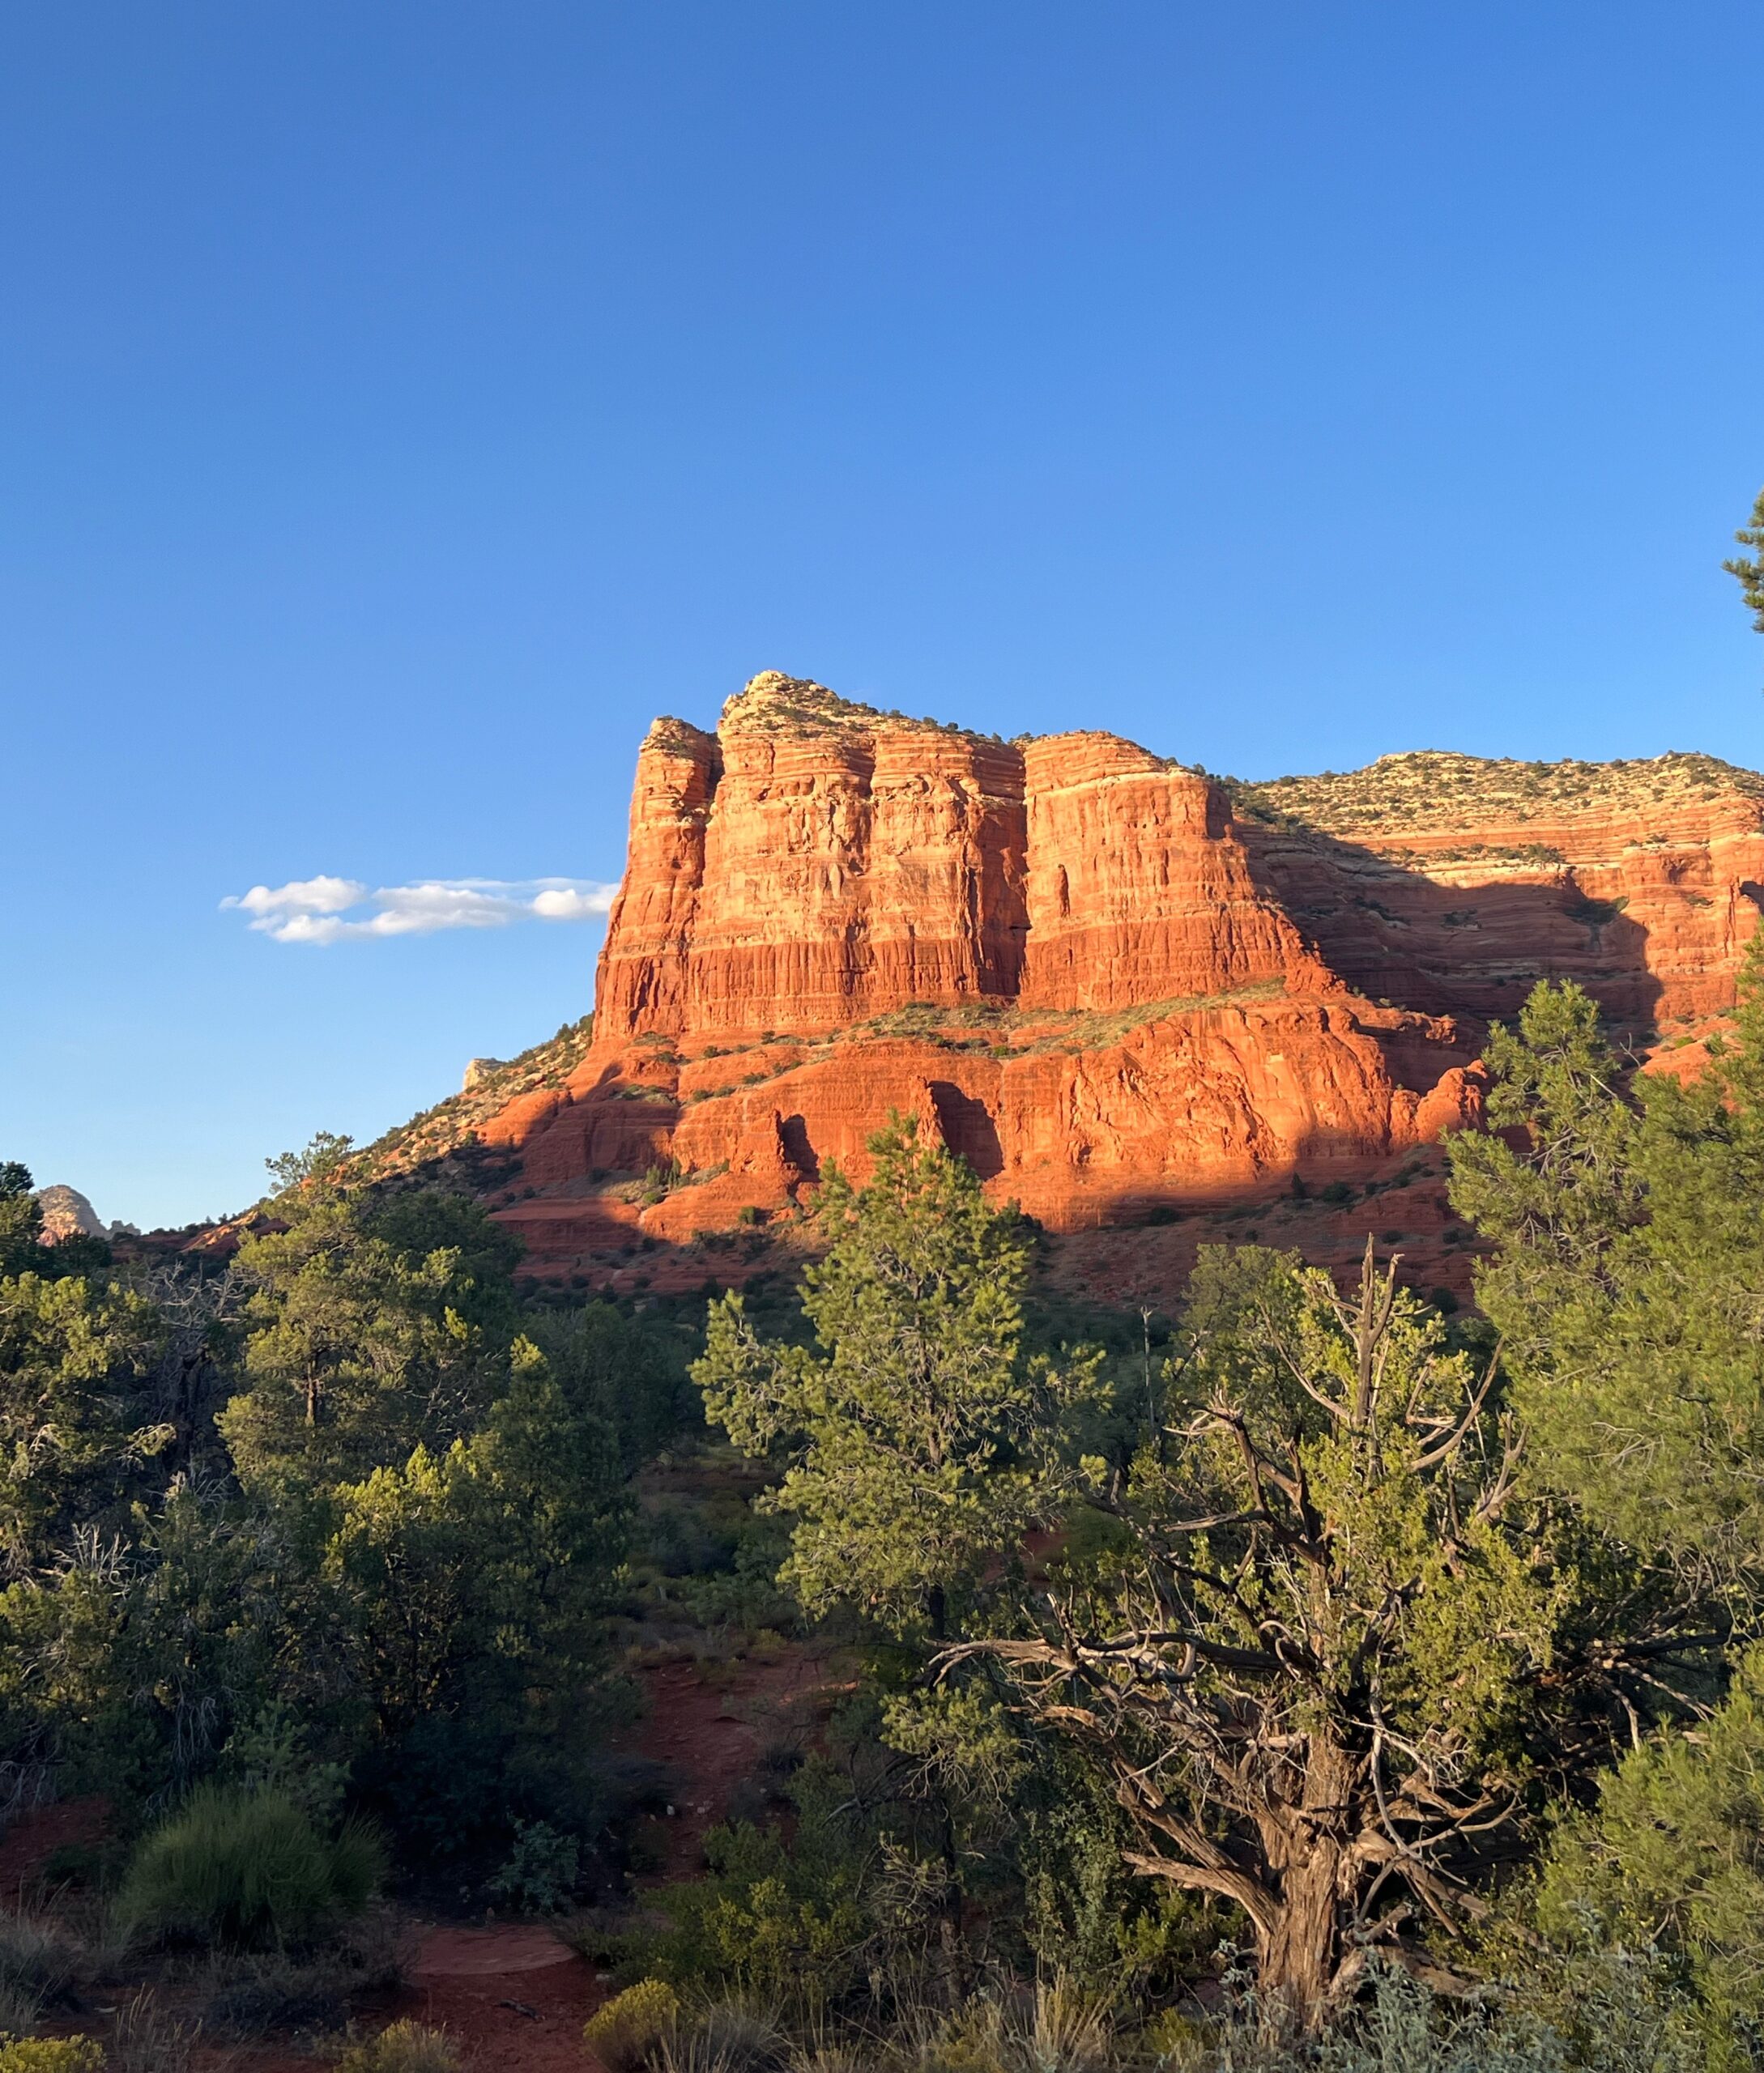 The Only 1 Day Sedona Itinerary You’ll Need